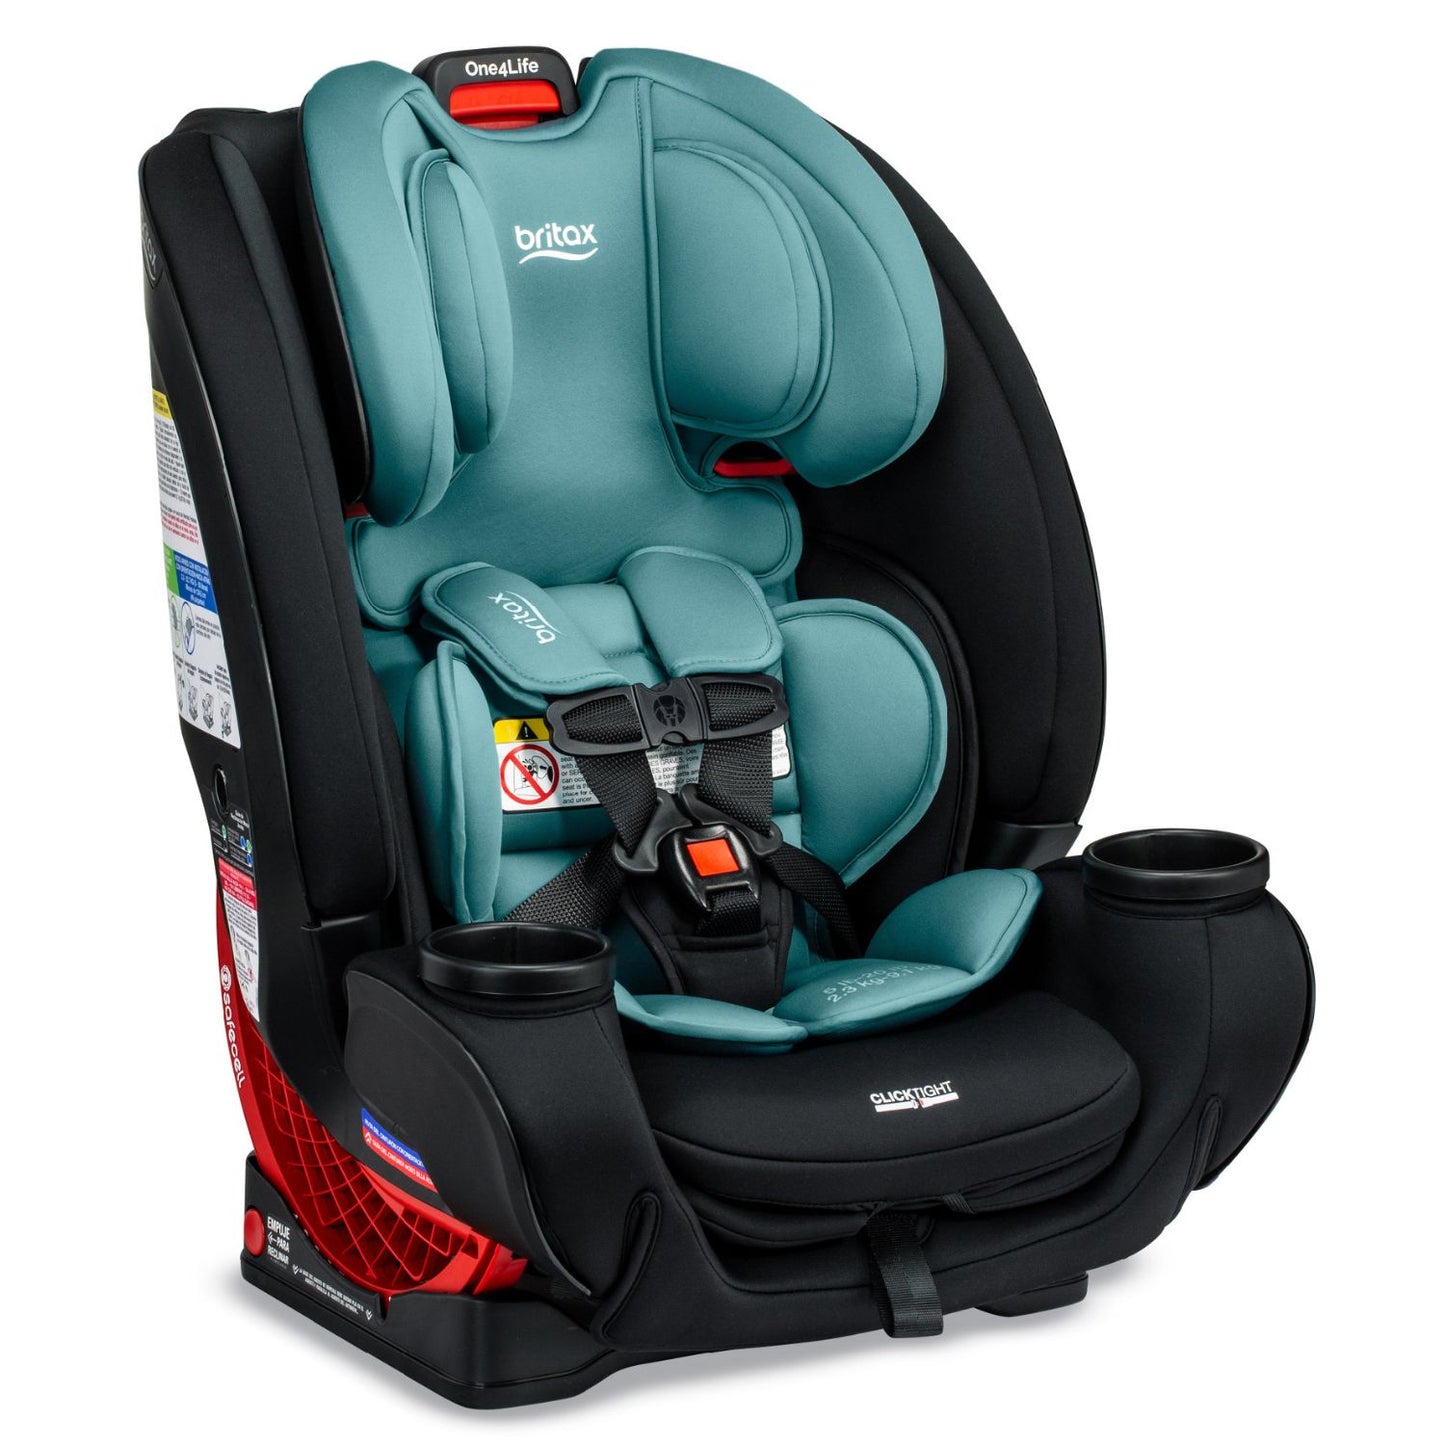 Britax One4Life ClickTight All-In-One Car Seat - Jade Onyx